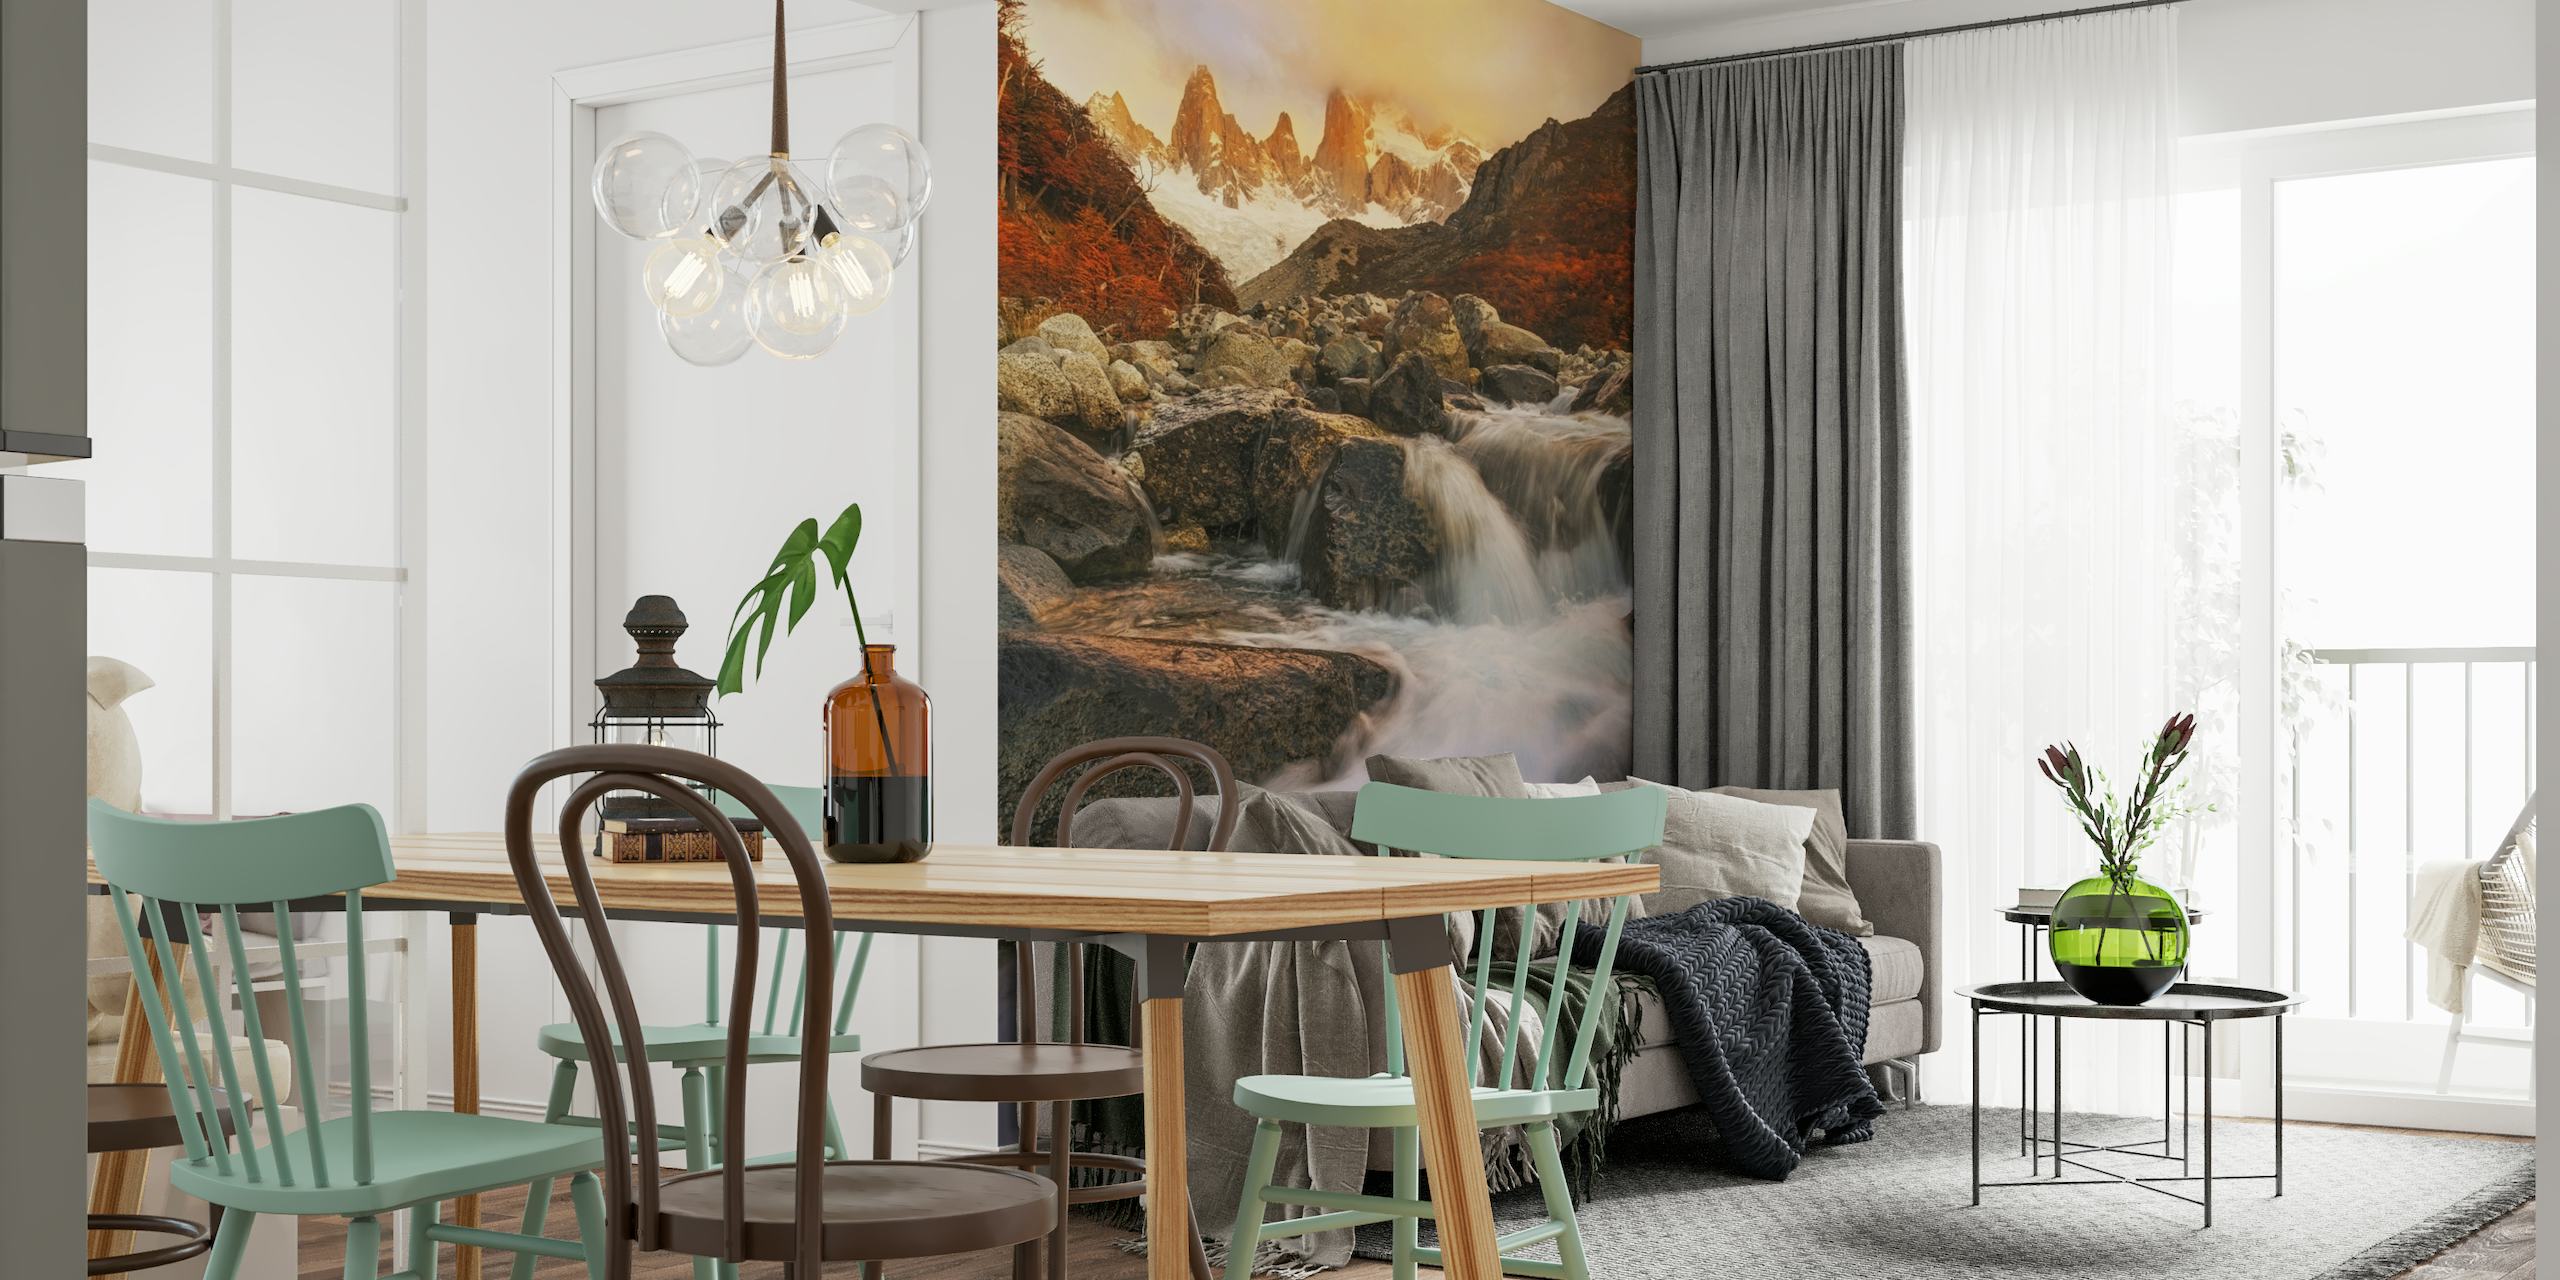 Wall mural of an autumnal landscape with flowing river and golden-hued foliage